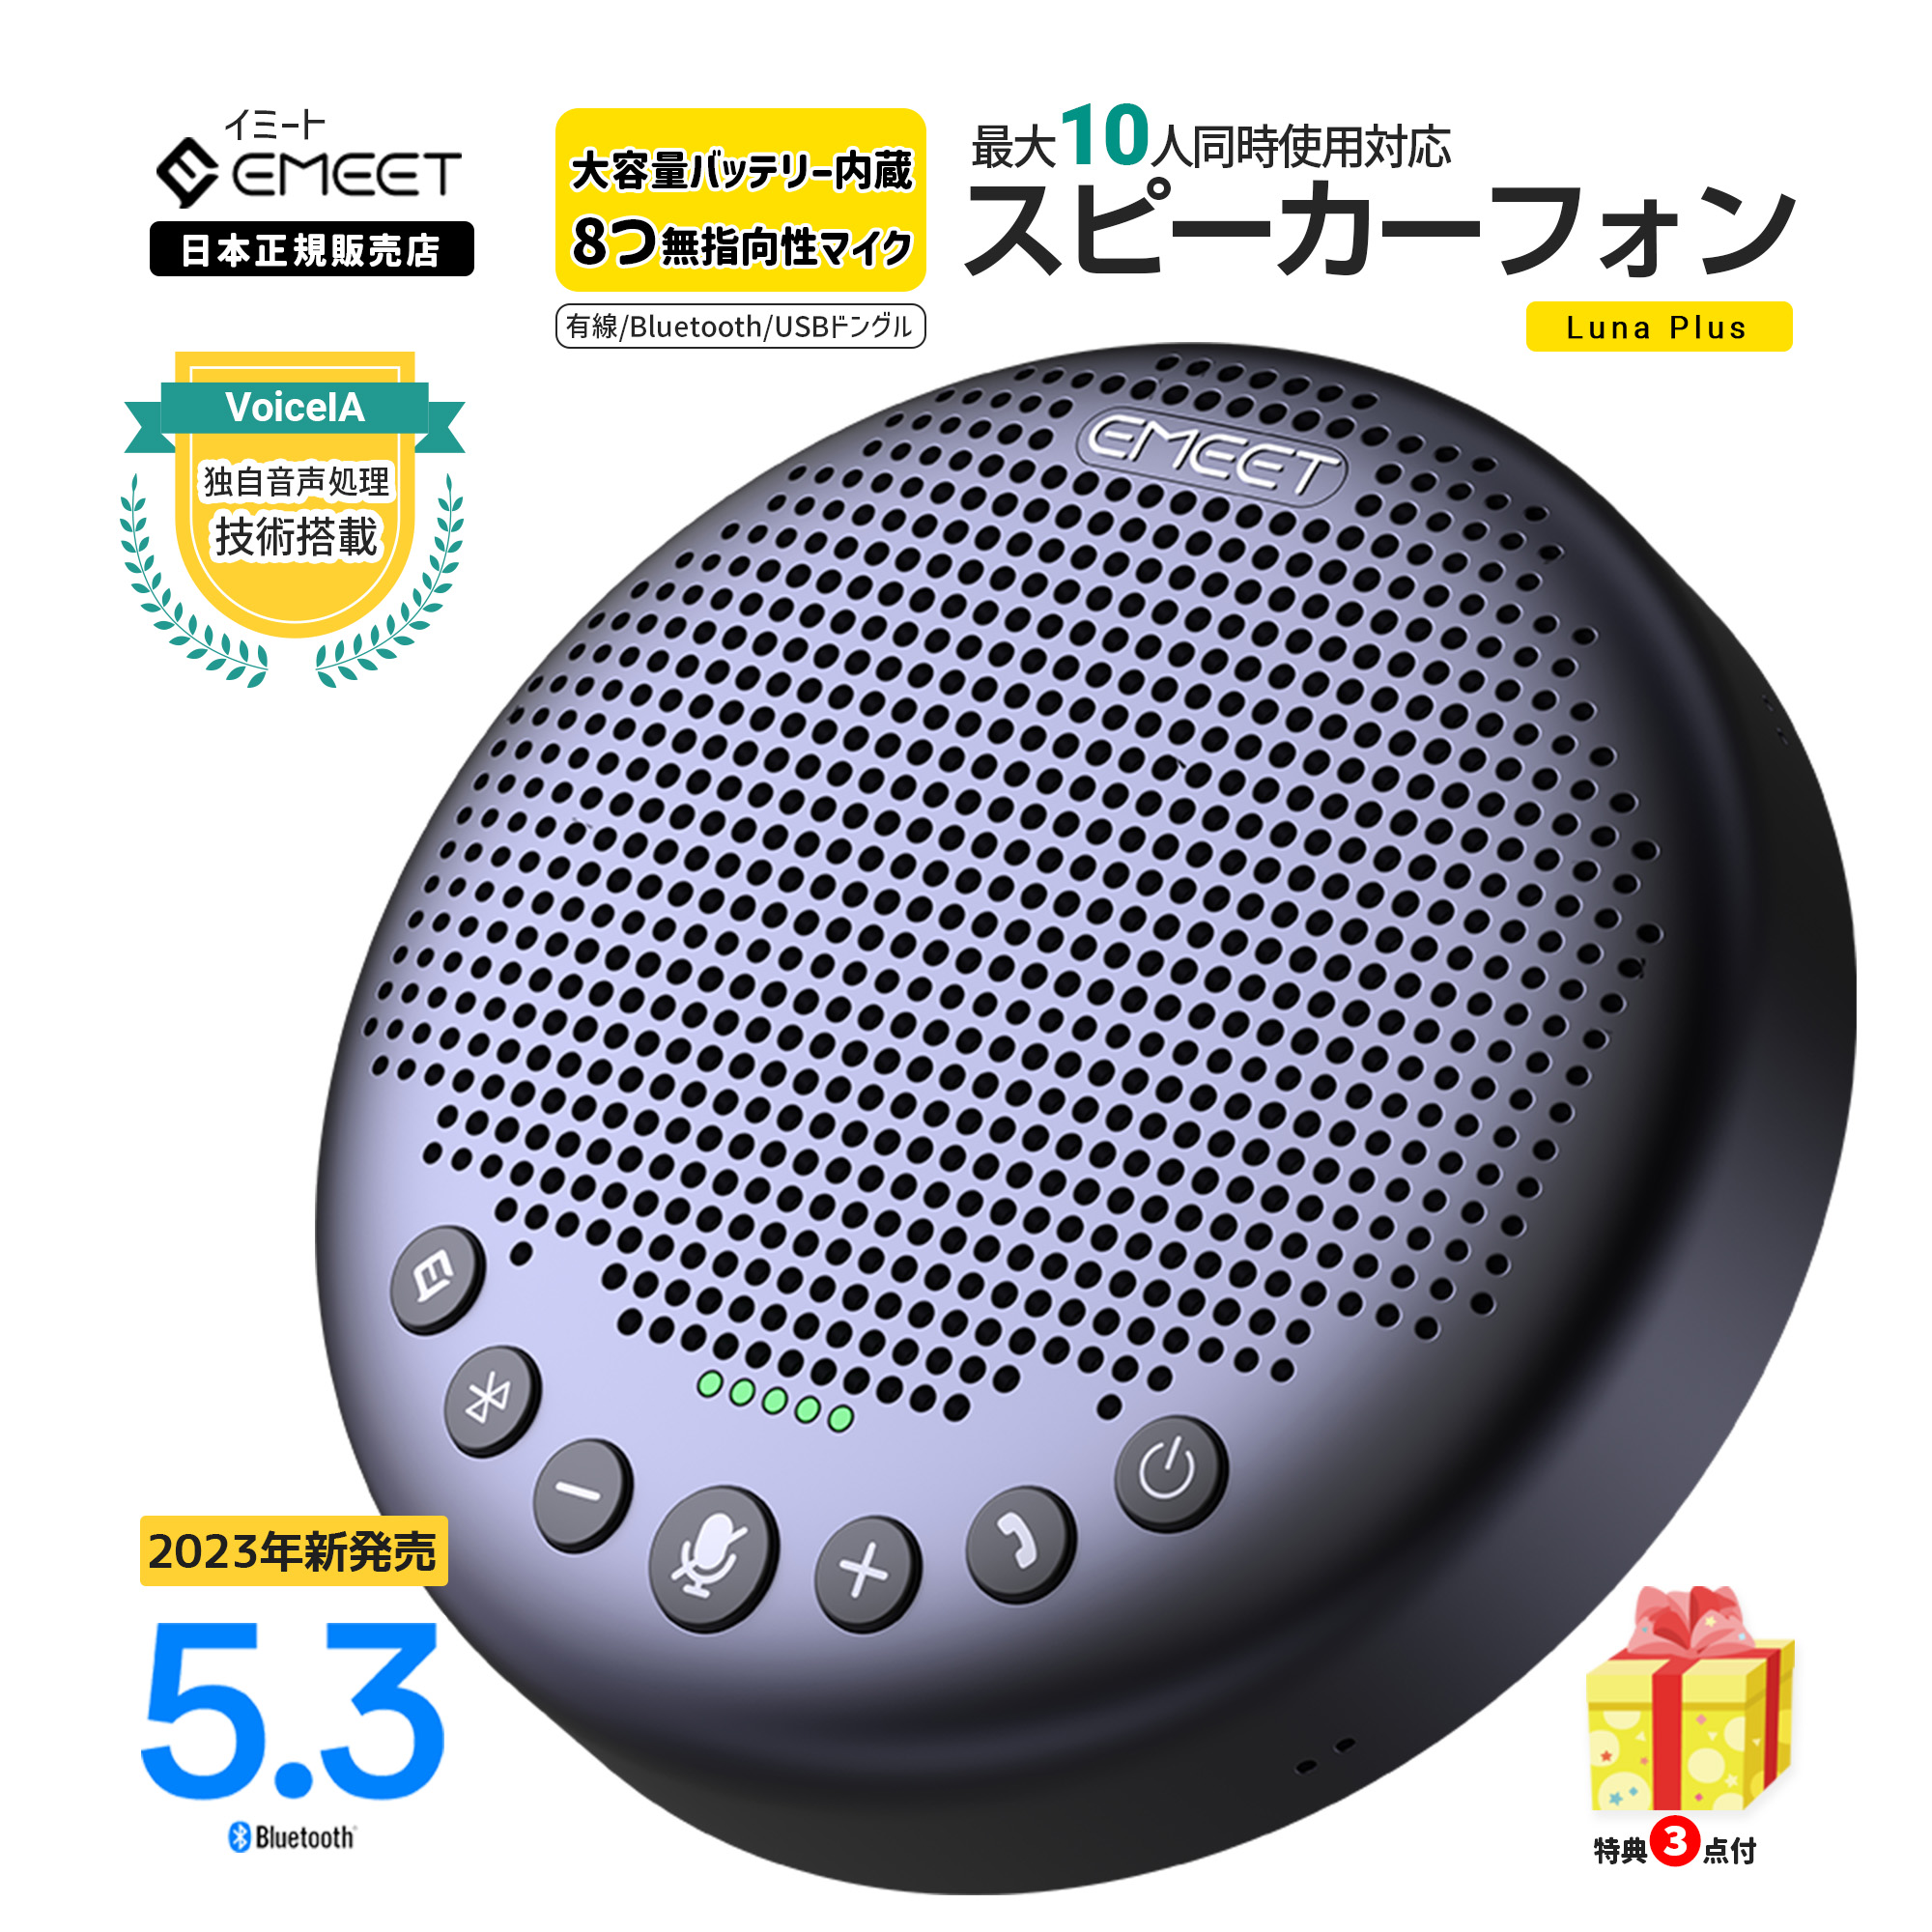 【24%OFF+Point最大12%】 EMEET Luna Plus ワイヤレス スピーカーフォン Bluetooth バッテリー内蔵 8つマイク エコーキャンセリング 最大10人対応 会議用｜starq-online